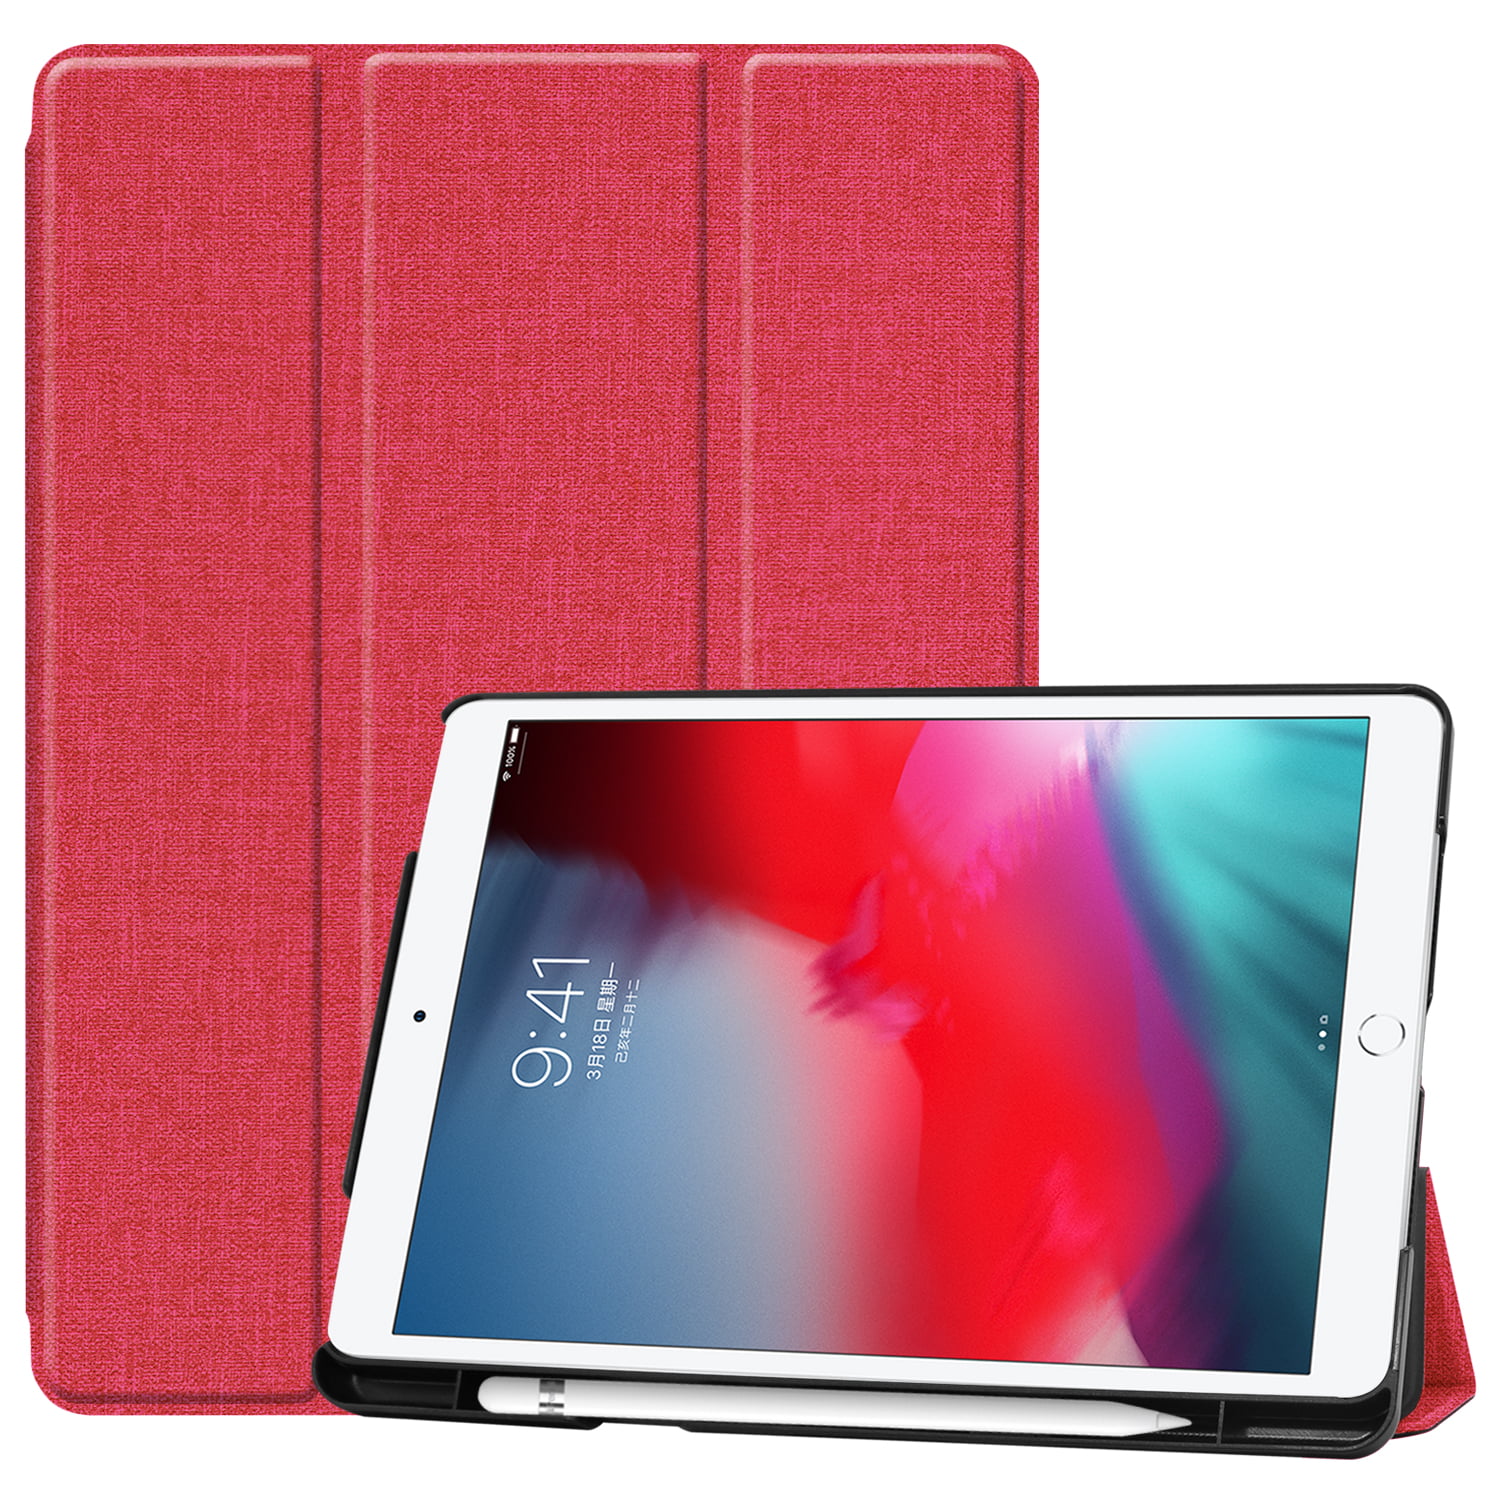 Connect Zone Compatible with iPad Mini 2 3 PU Leather Case Cover 360 Degree Rotating Auto Sleep Wake Function with Screen Guard and Stylus Red